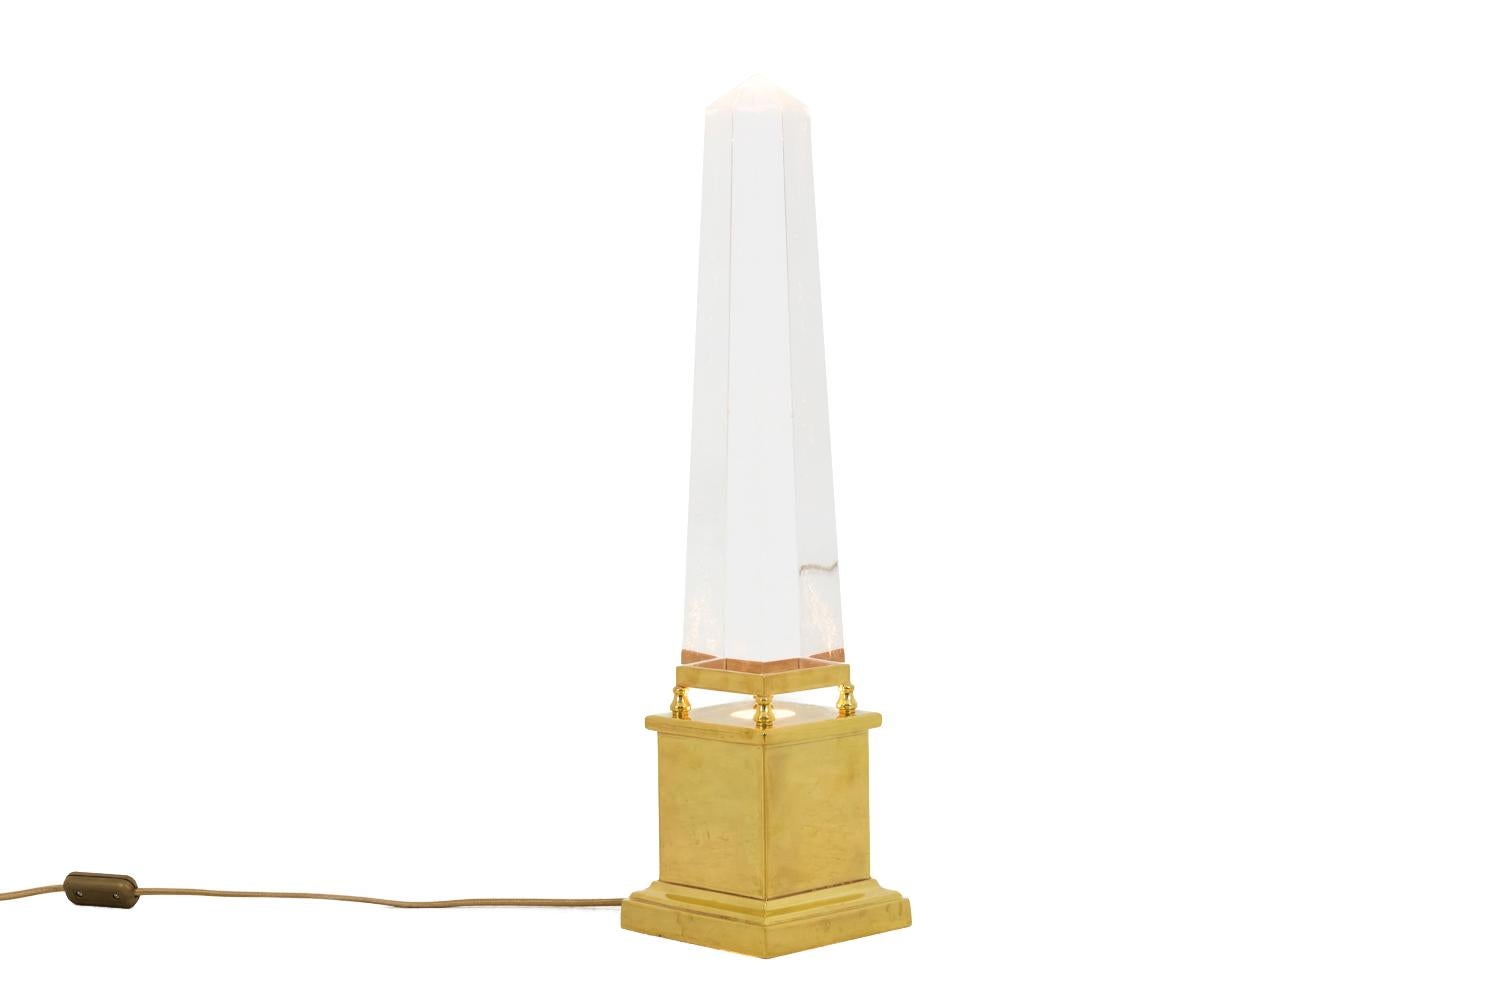 Sandro Petti for Maison Jansen, in the style of.

Obelisk lamp in Lucite standing on a cubic gilt brass base opened in its centre to let pass the light, finished by a molded square base and topped by a small base on four legs supporting the